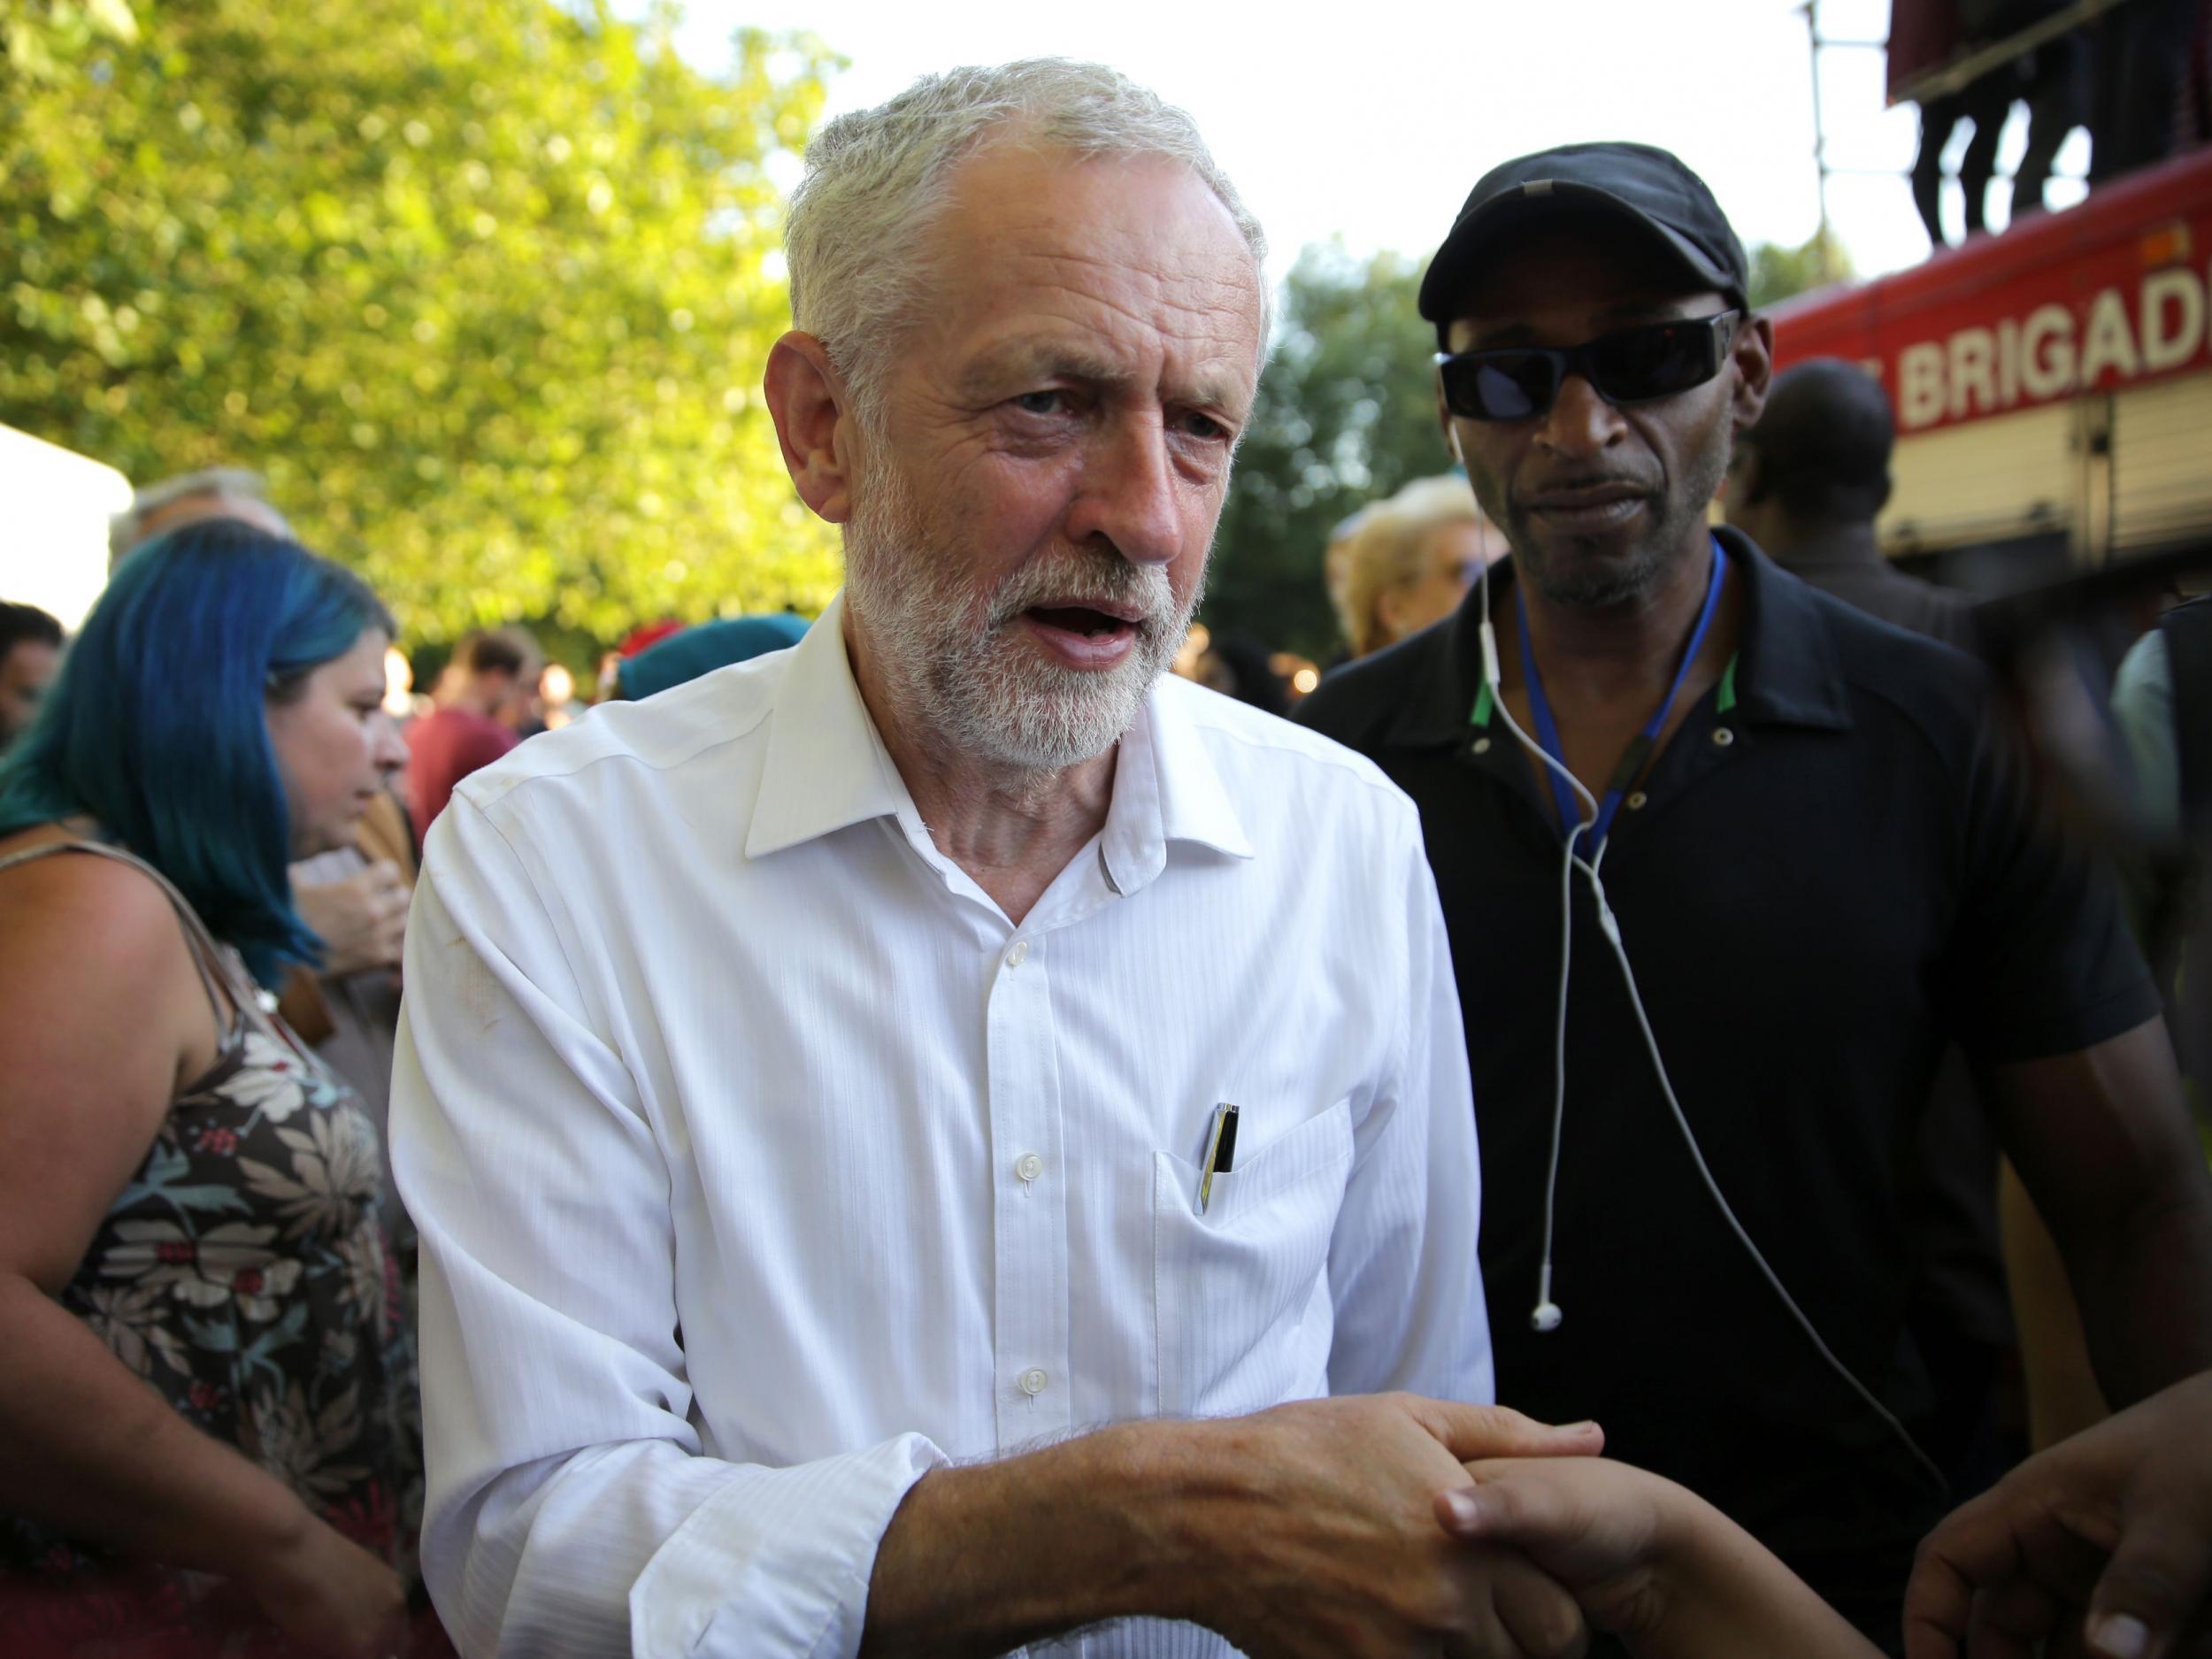 Jeremy Corbyn arrives to attend a Black, Asian and minority ethnic (BAME) rally in north London